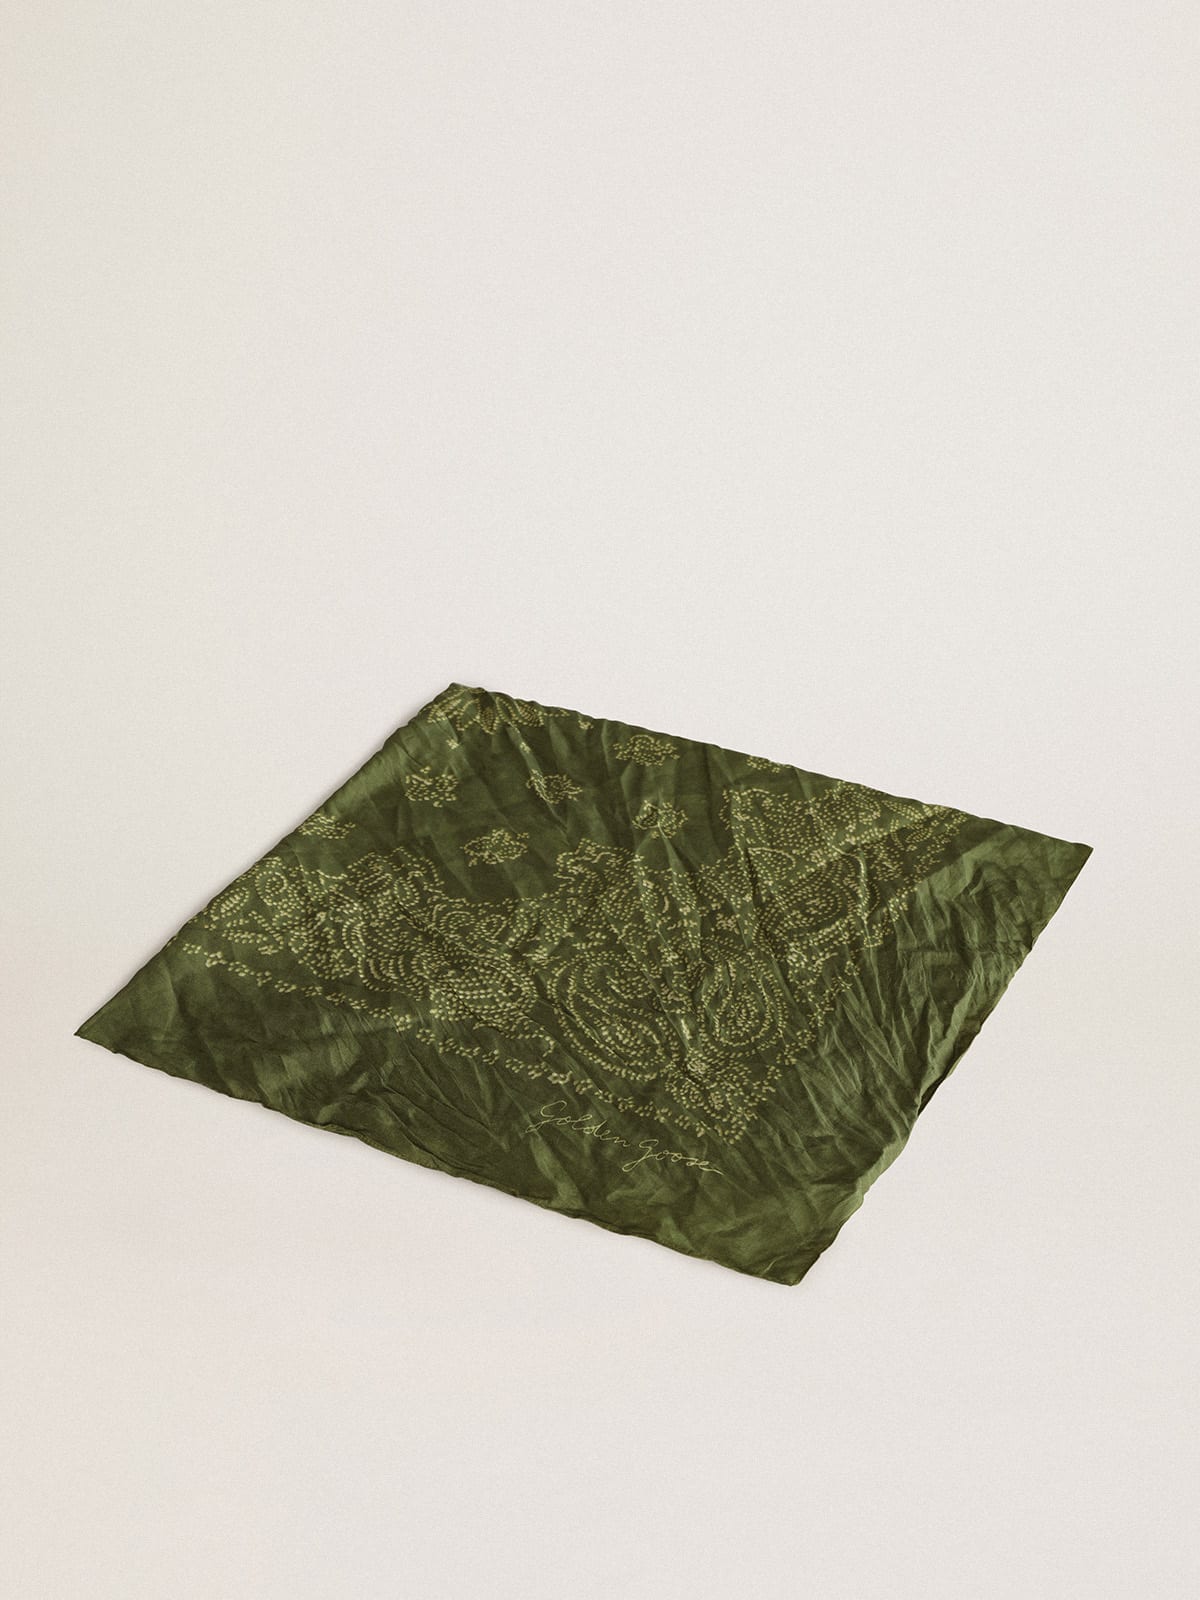 Golden Goose - Pesto-colored scarf with dotted paisley pattern in 